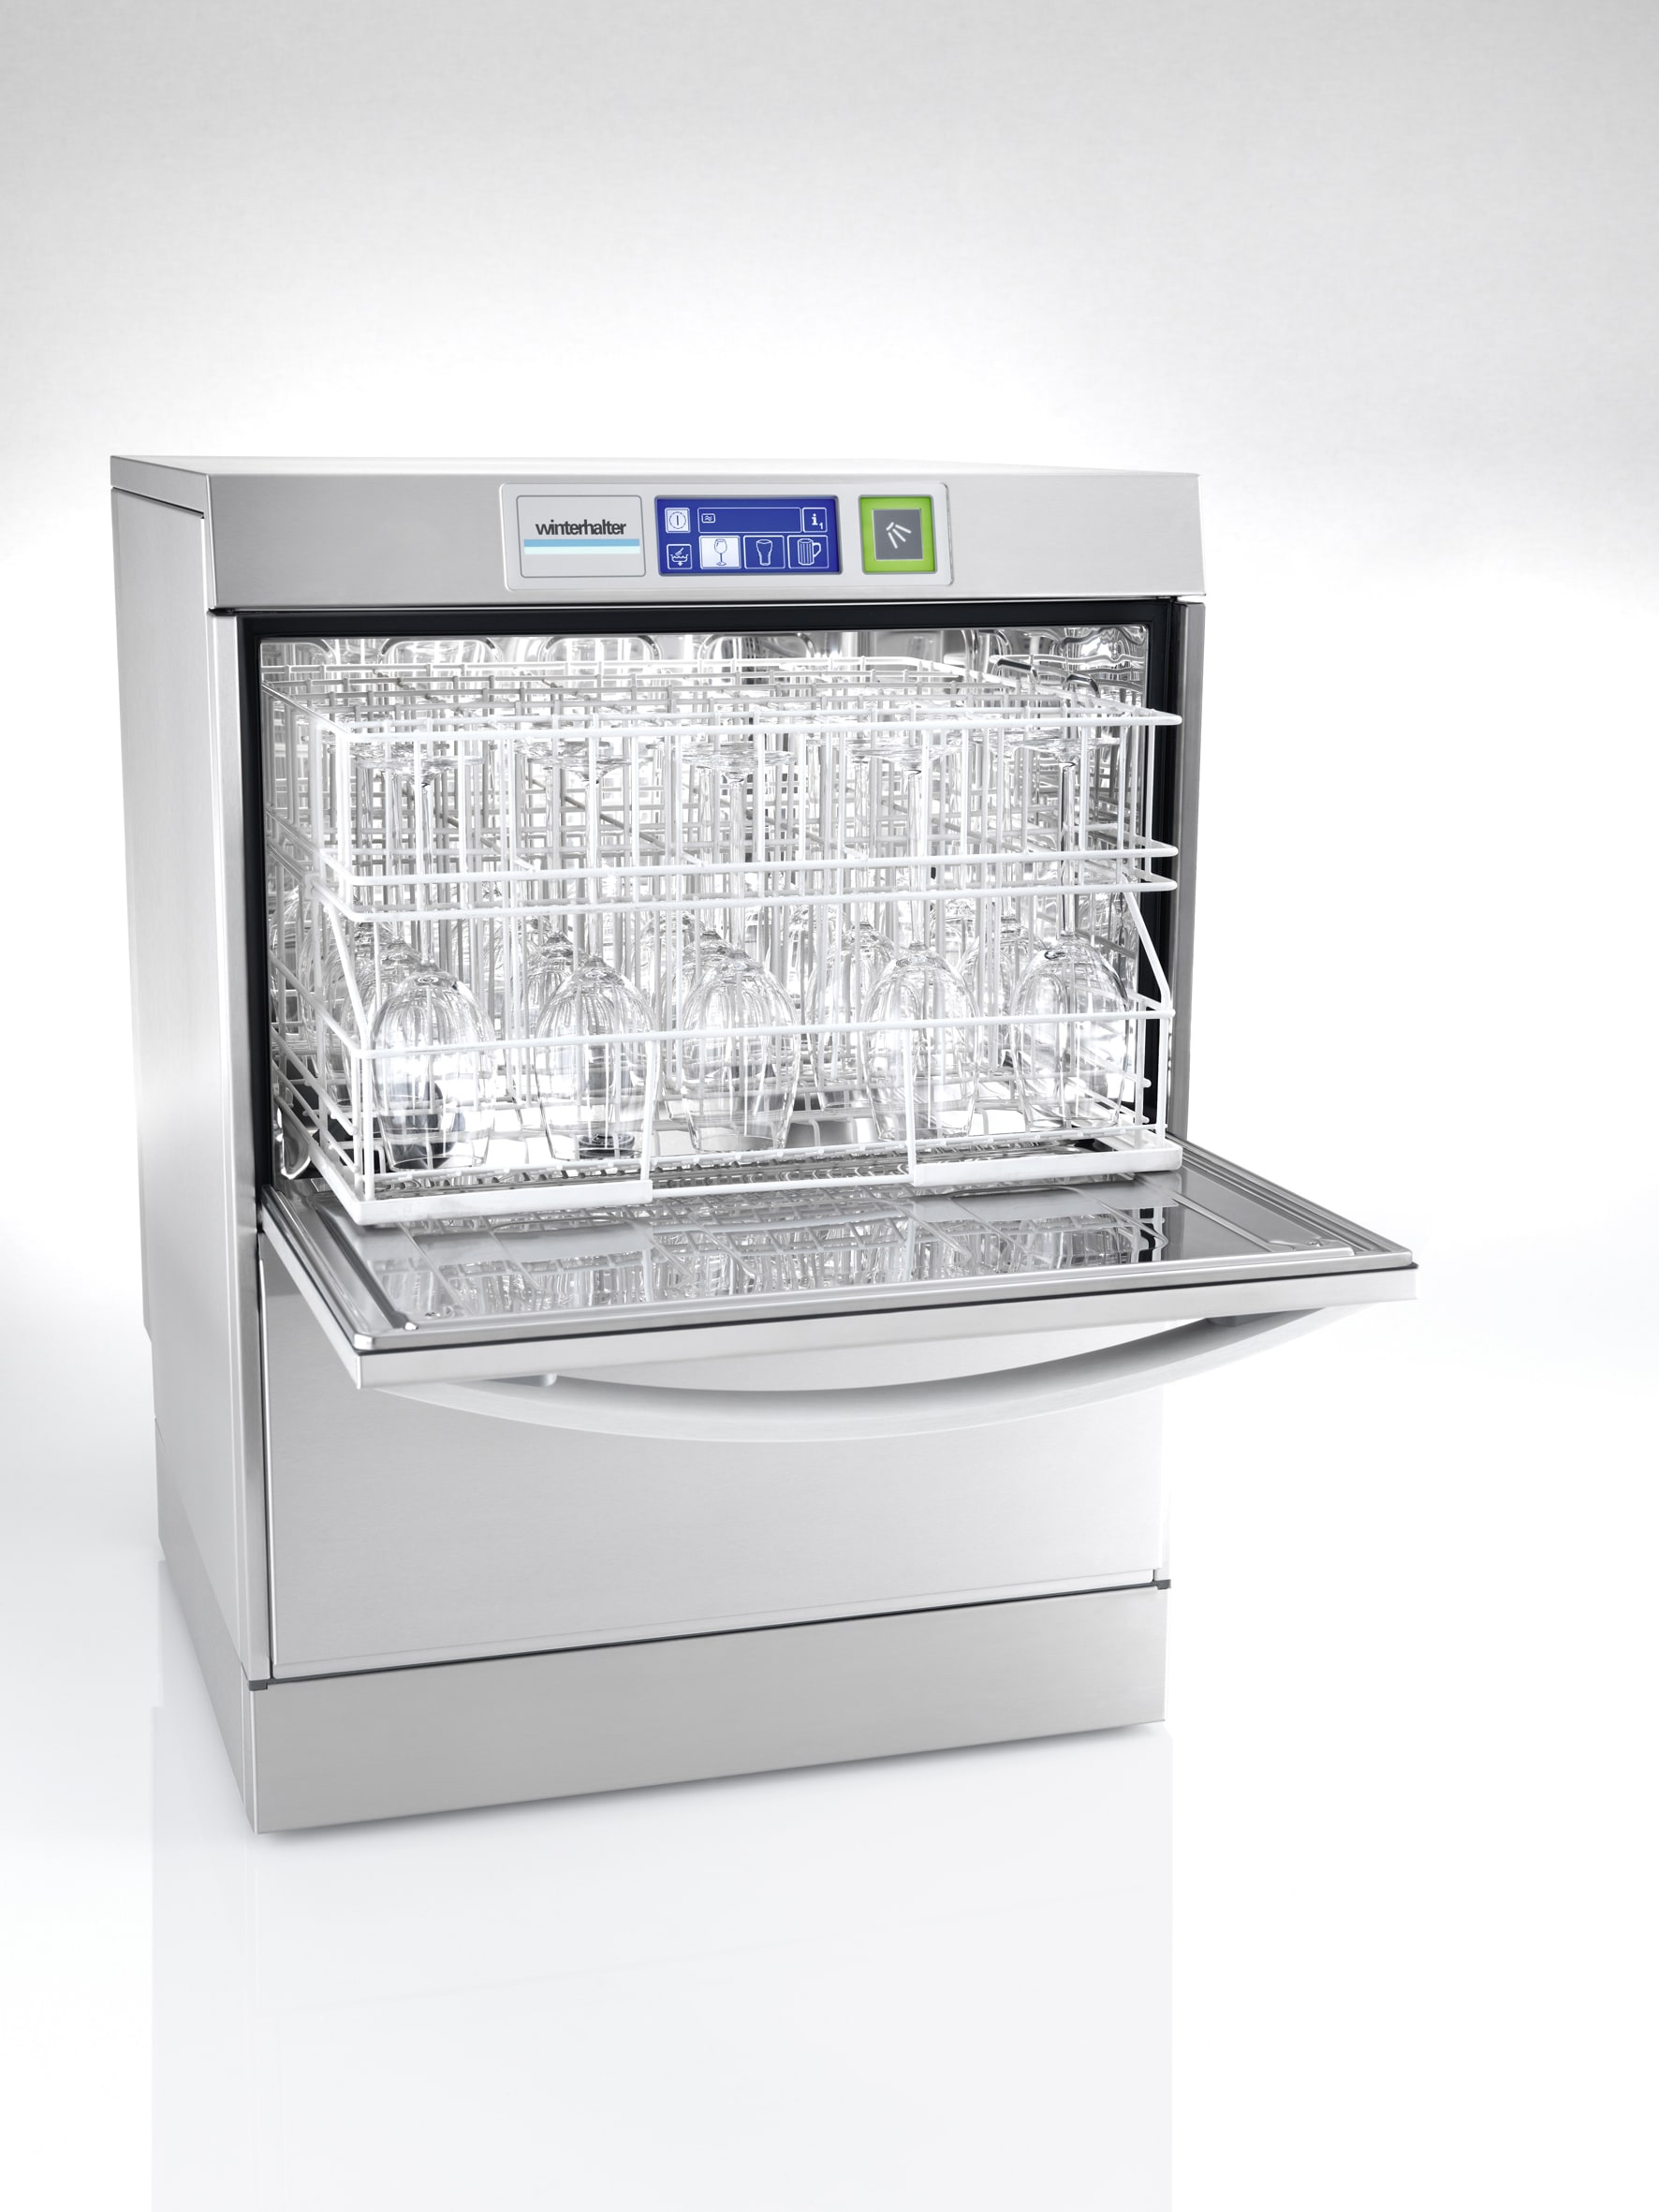 UC-Excellence-iPlus-from-Winterhalter